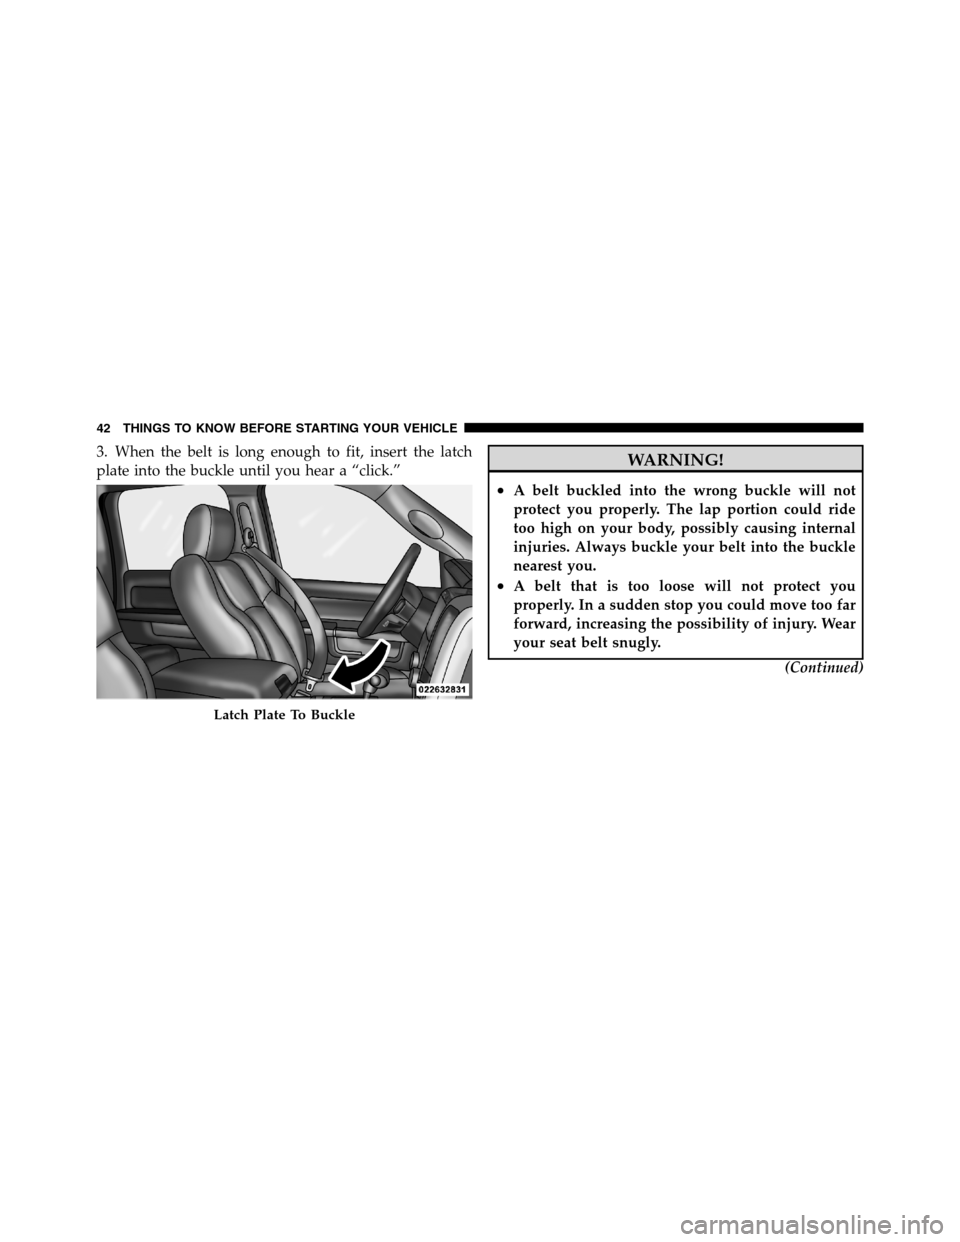 Ram 3500 2011 Service Manual 3. When the belt is long enough to fit, insert the latch
plate into the buckle until you hear a “click.”WARNING!
•A belt buckled into the wrong buckle will not
protect you properly. The lap port